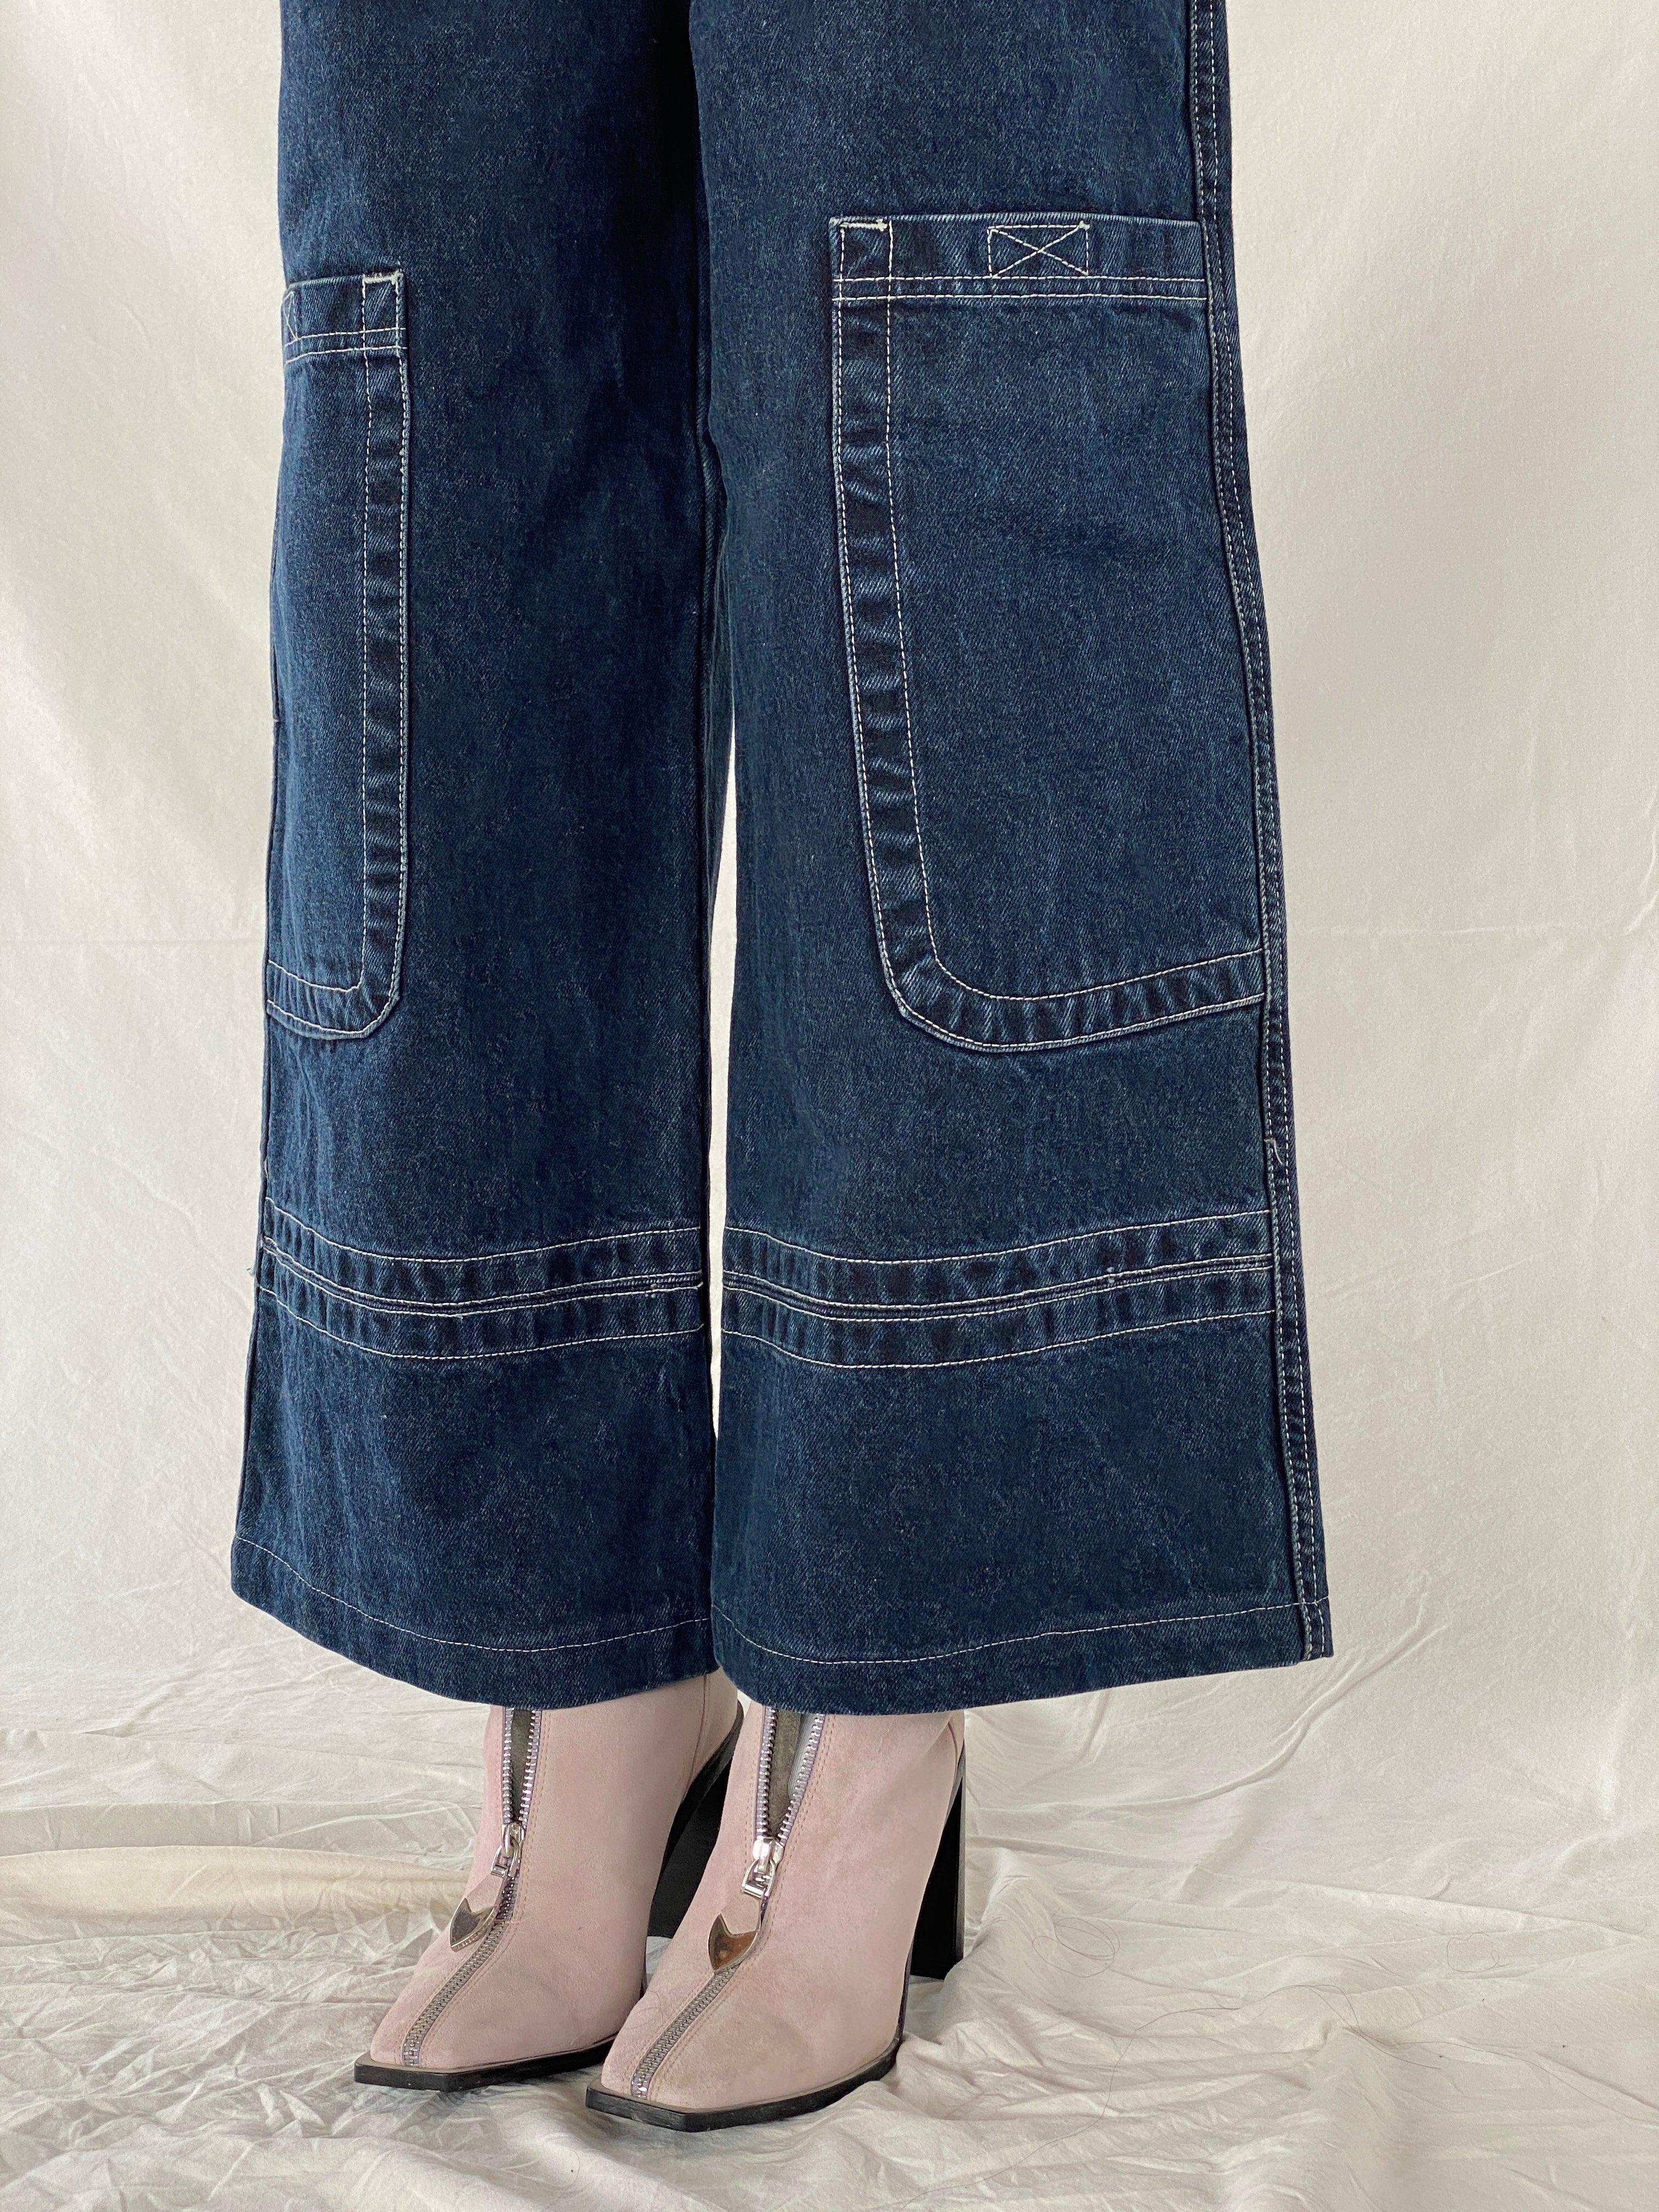 Simply The Best Hip Hop Style Baggy Jeans - Balagan Vintage Jeans 00s, HipHop, hiphop jeans, NEW IN, Tojan